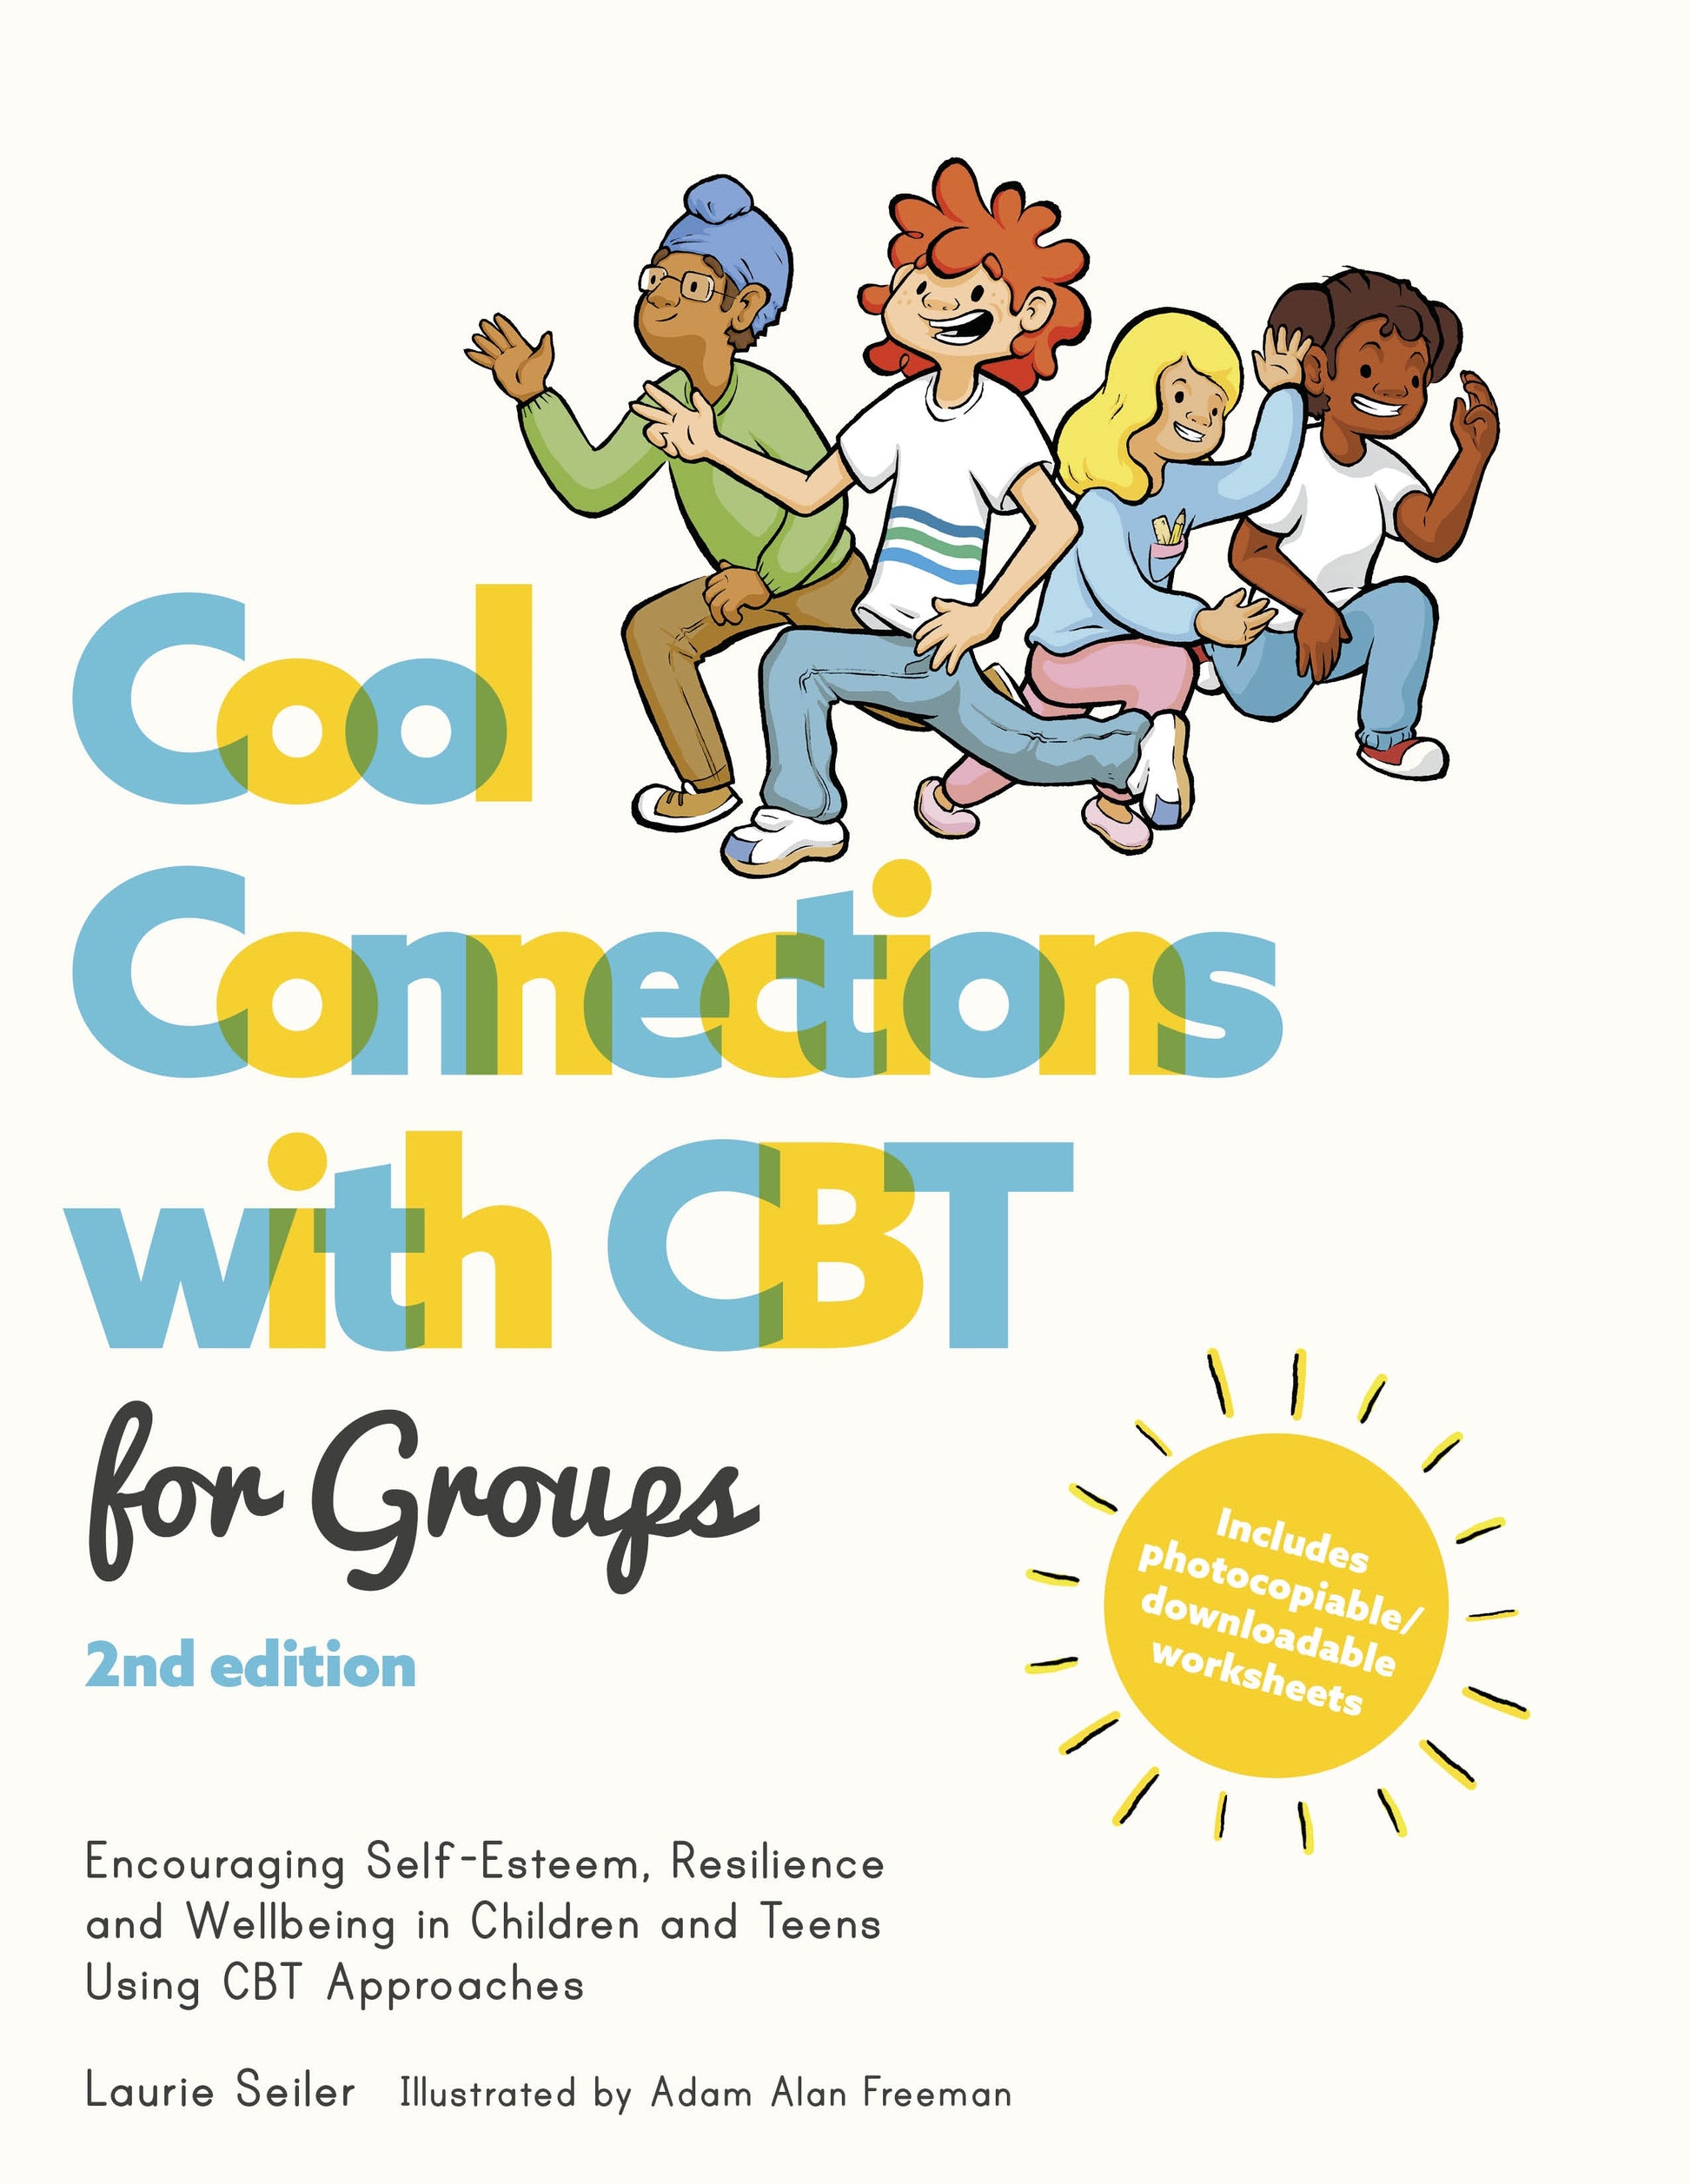 Cool Connections with CBT for Groups, 2nd edition by Adam A. Freeman, Laurie Seiler